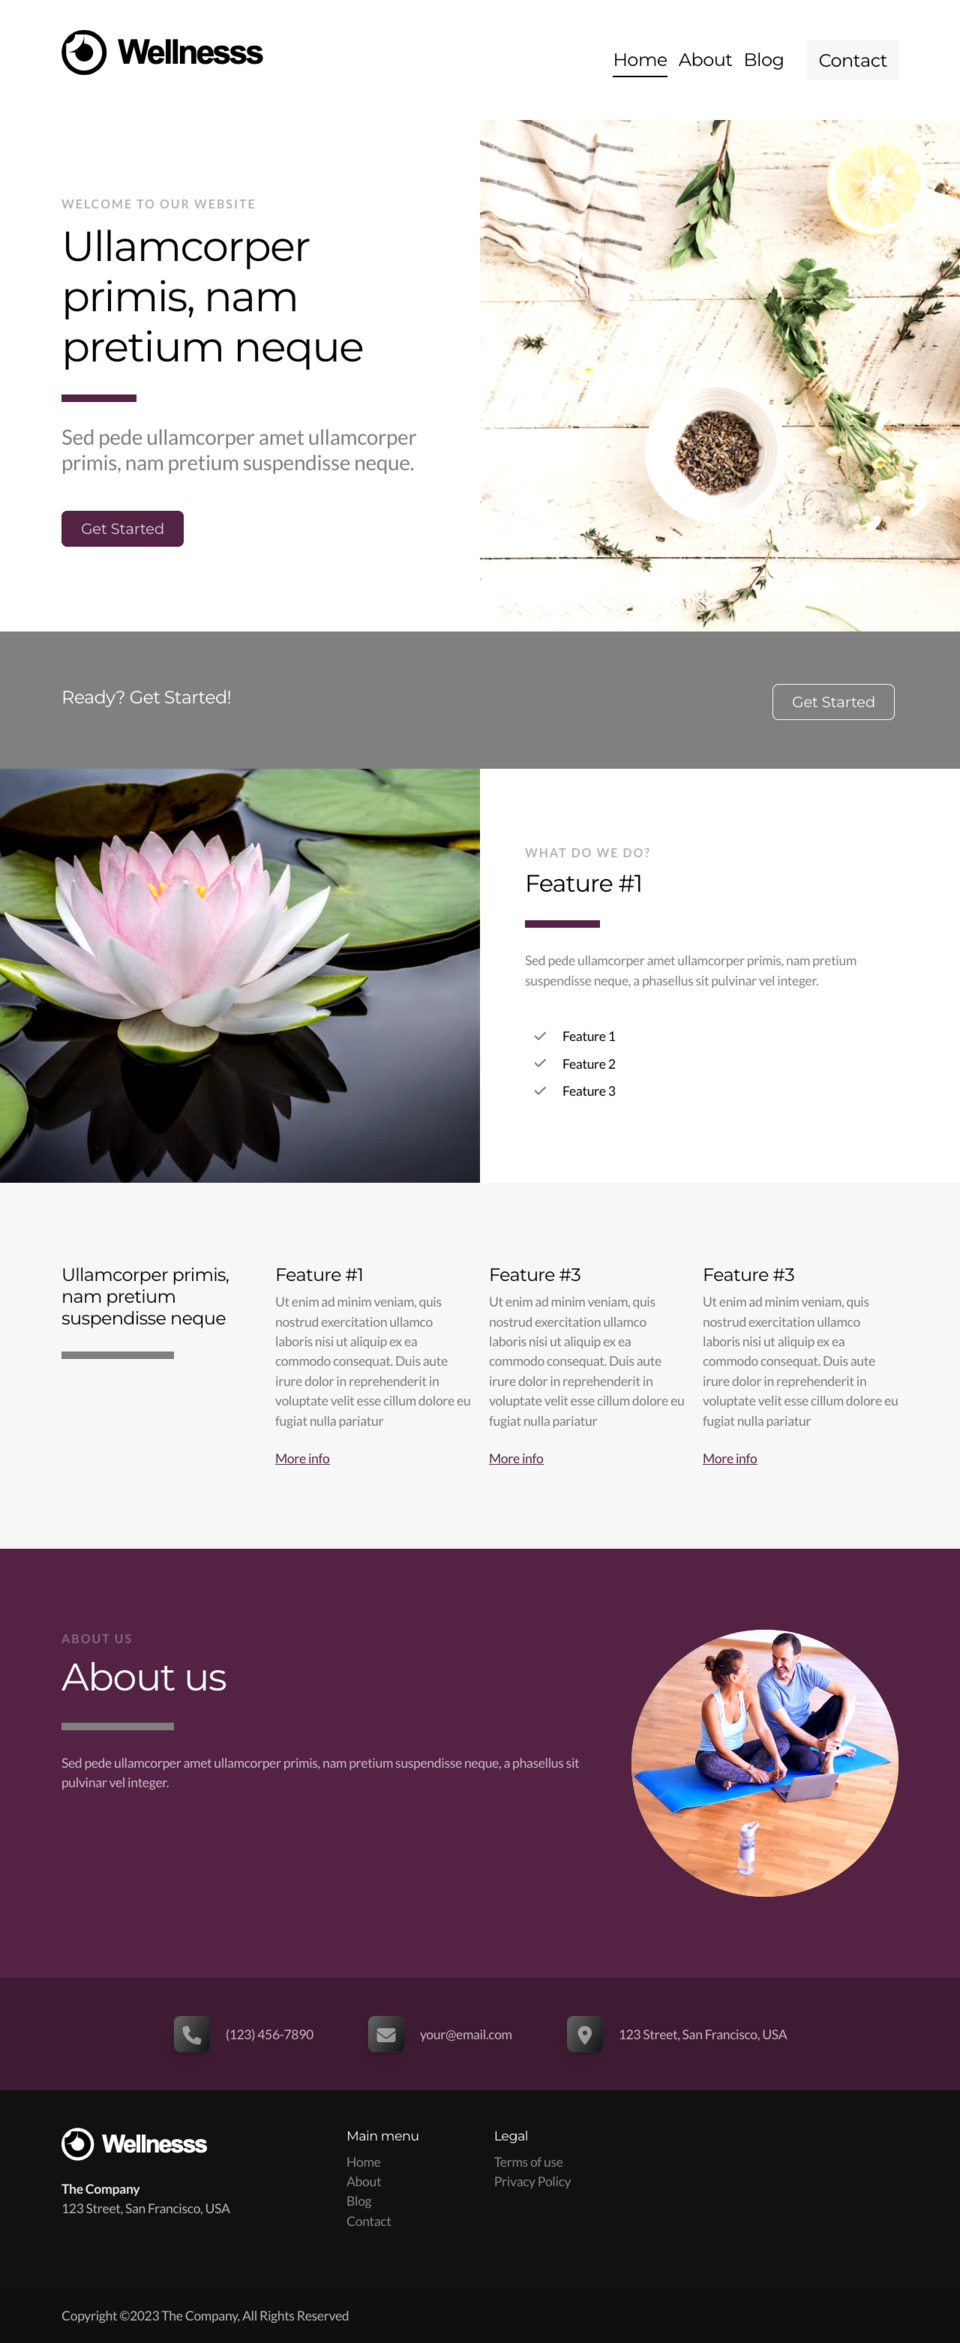 Wellness Website Template - Ideal for wellness spas, health coaches, fitness studios, nutritionists, and personal development bloggers